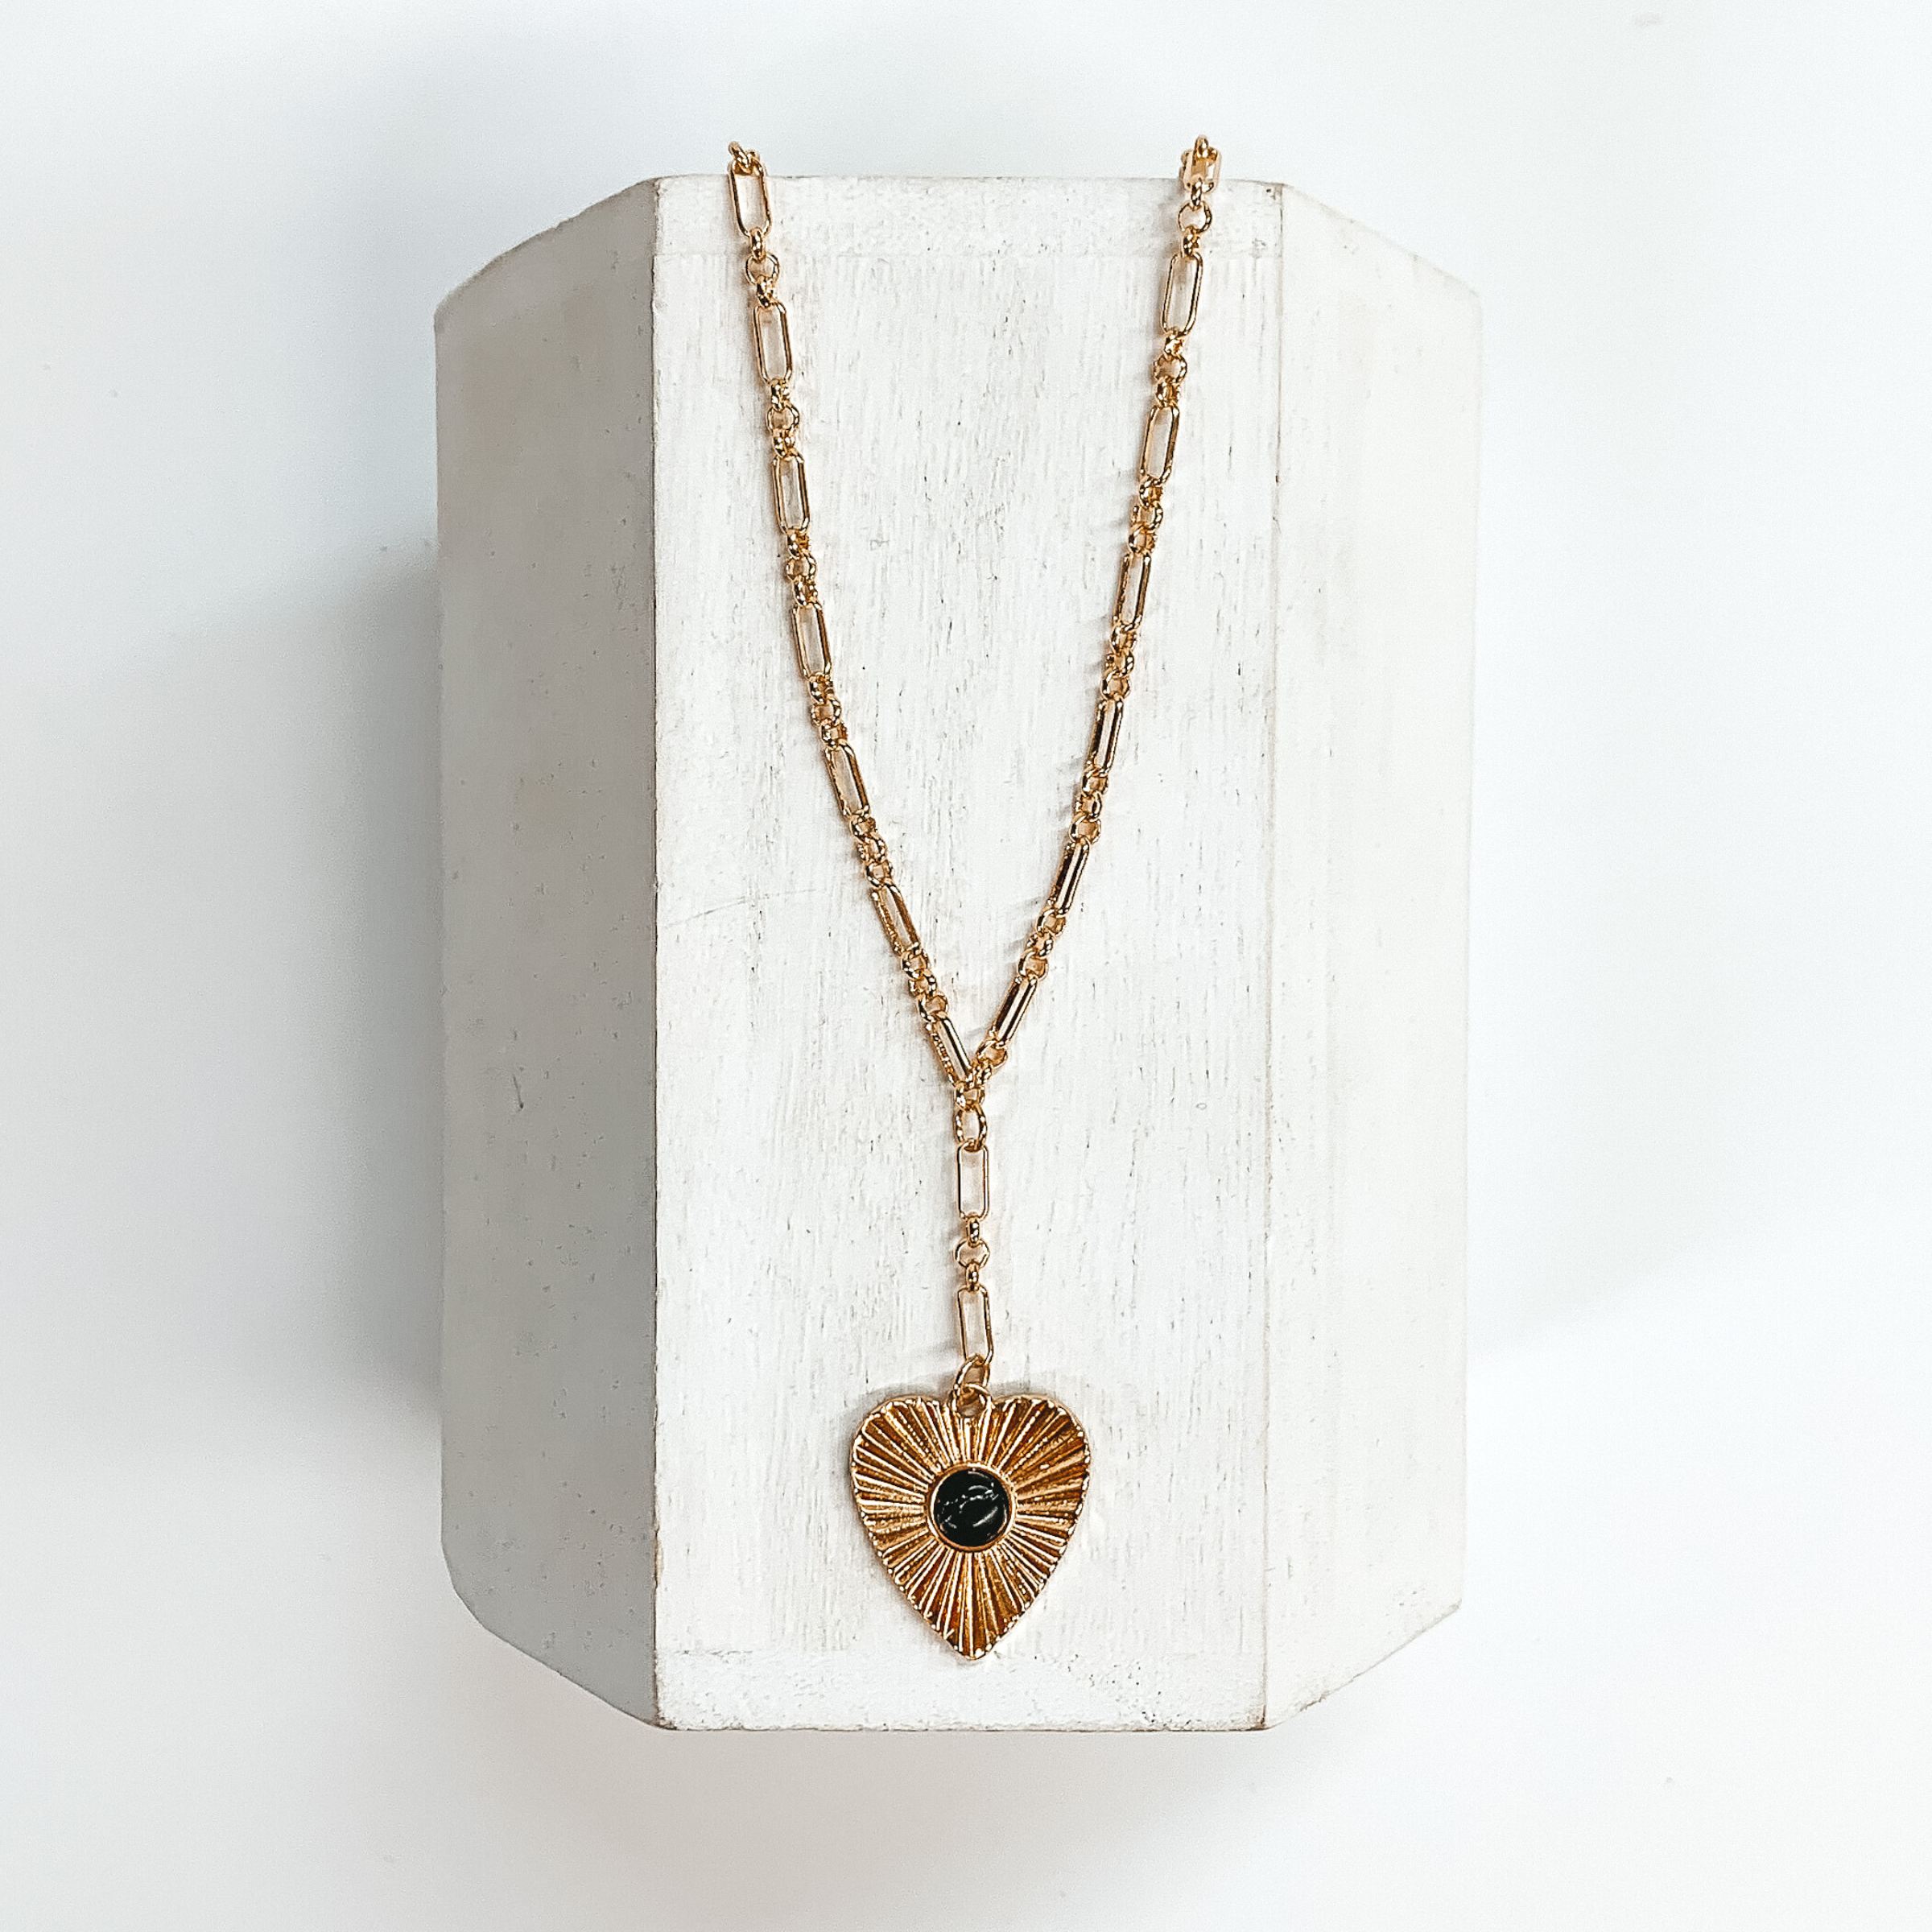 Gold linked chain with a sunburst heart pendant with a small black stone  in the center. This necklace is taken on a white block and on a white  background.